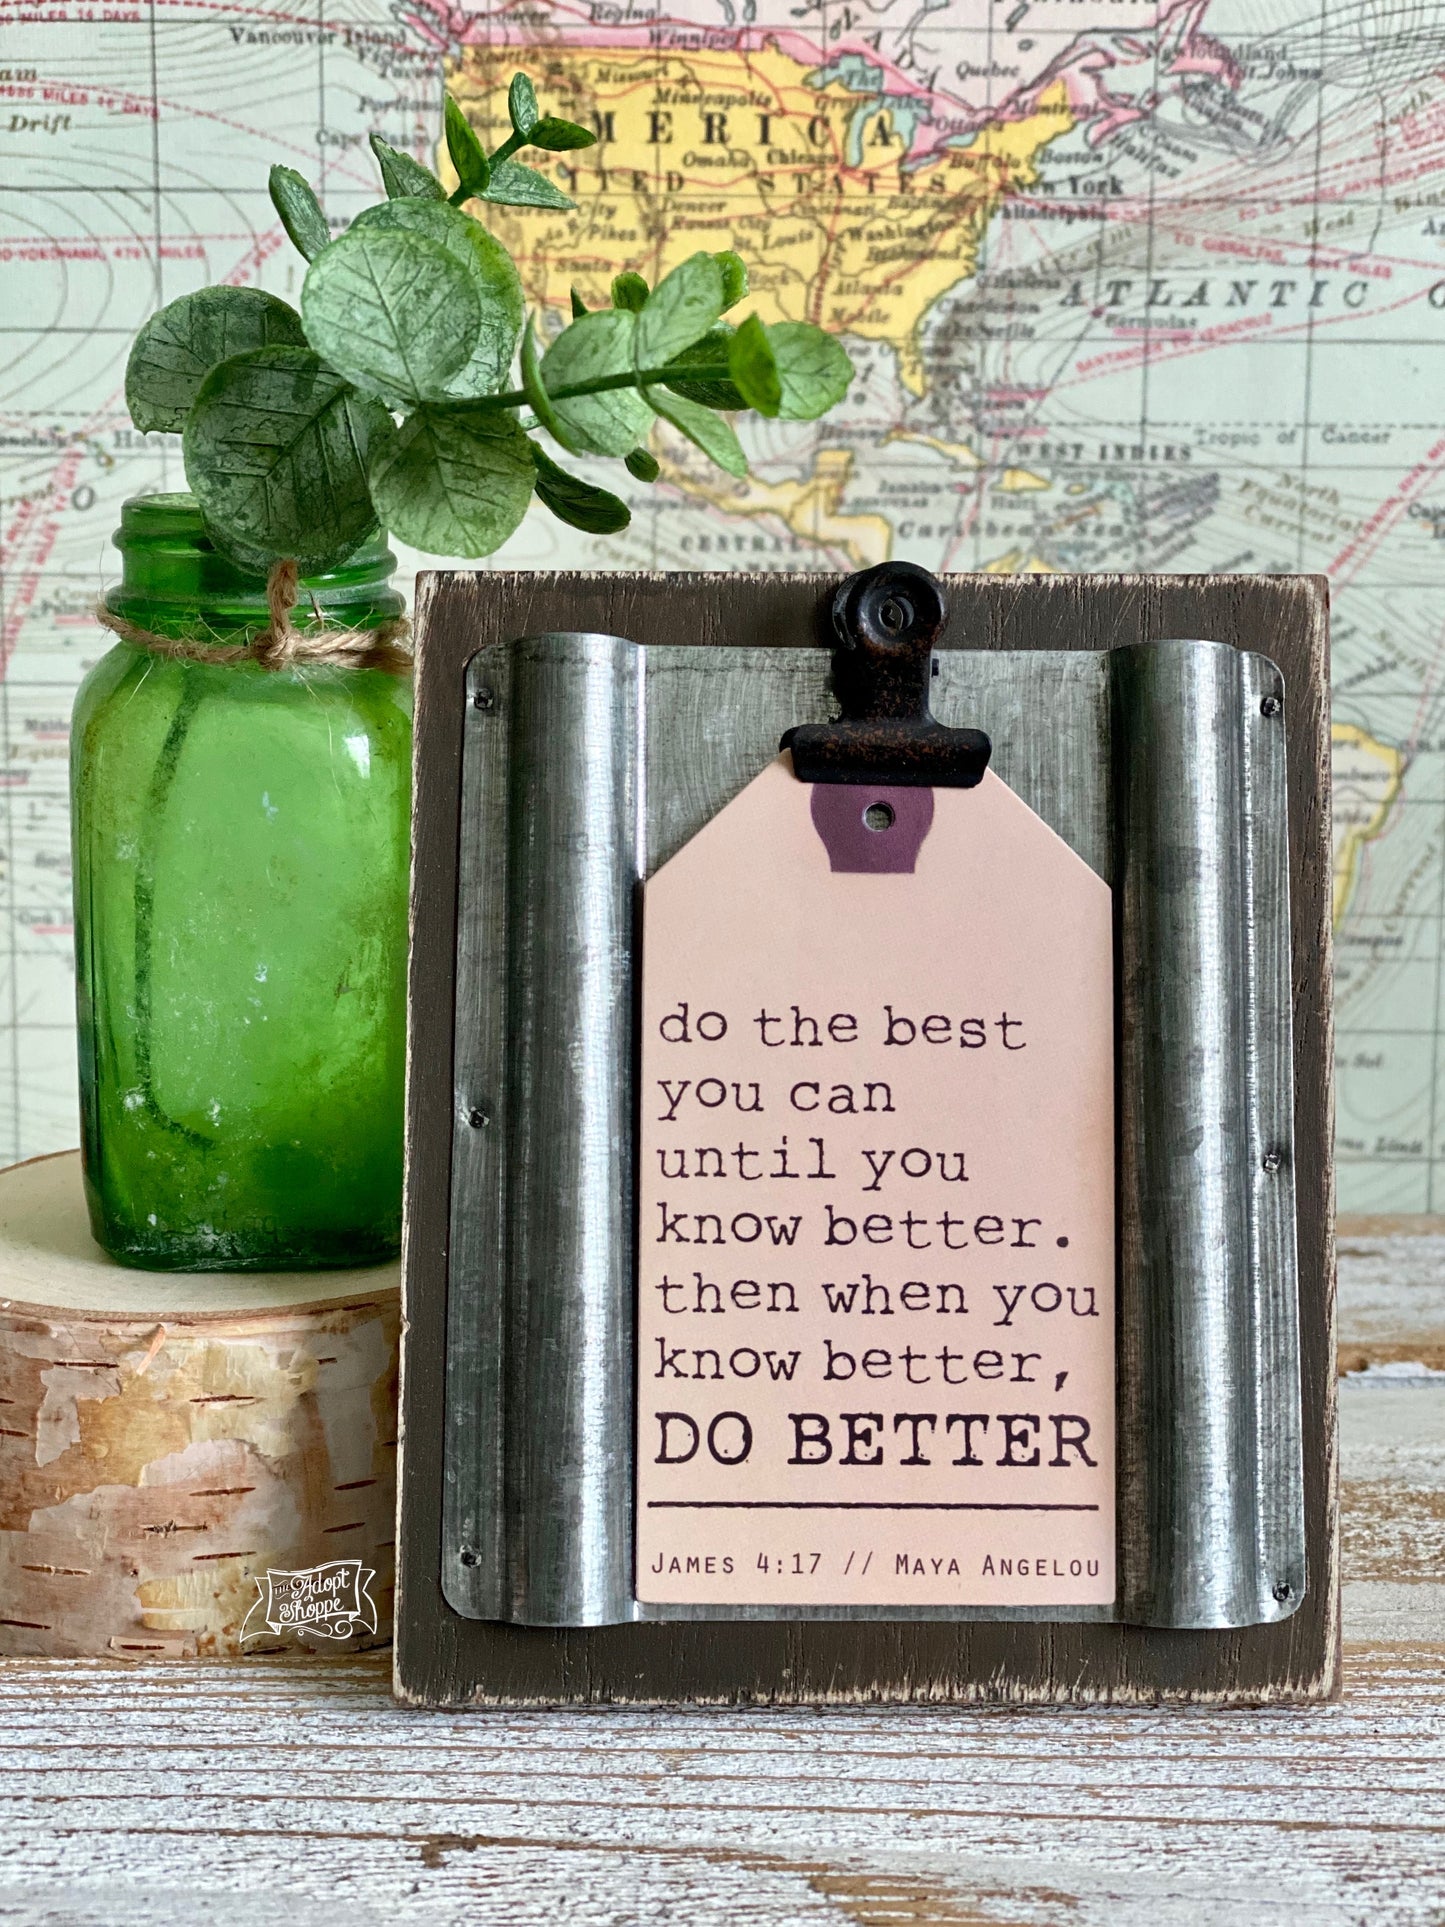 when you know better DO BETTER (Maya Angelou) #TheAdoptShoppecard